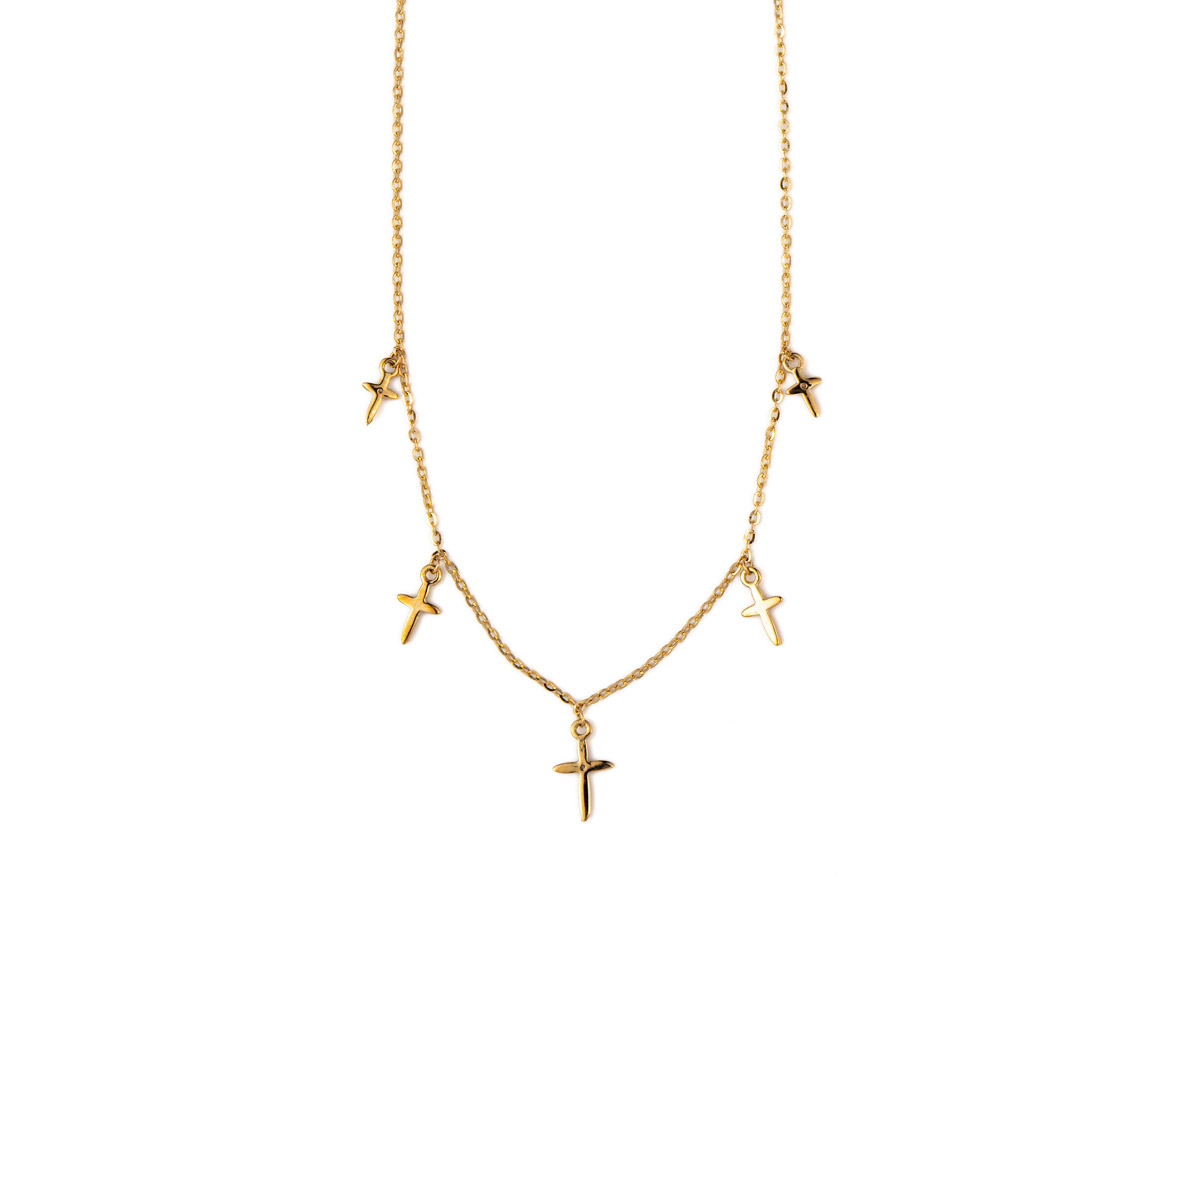 14K Gold Drop Necklace with Crosses